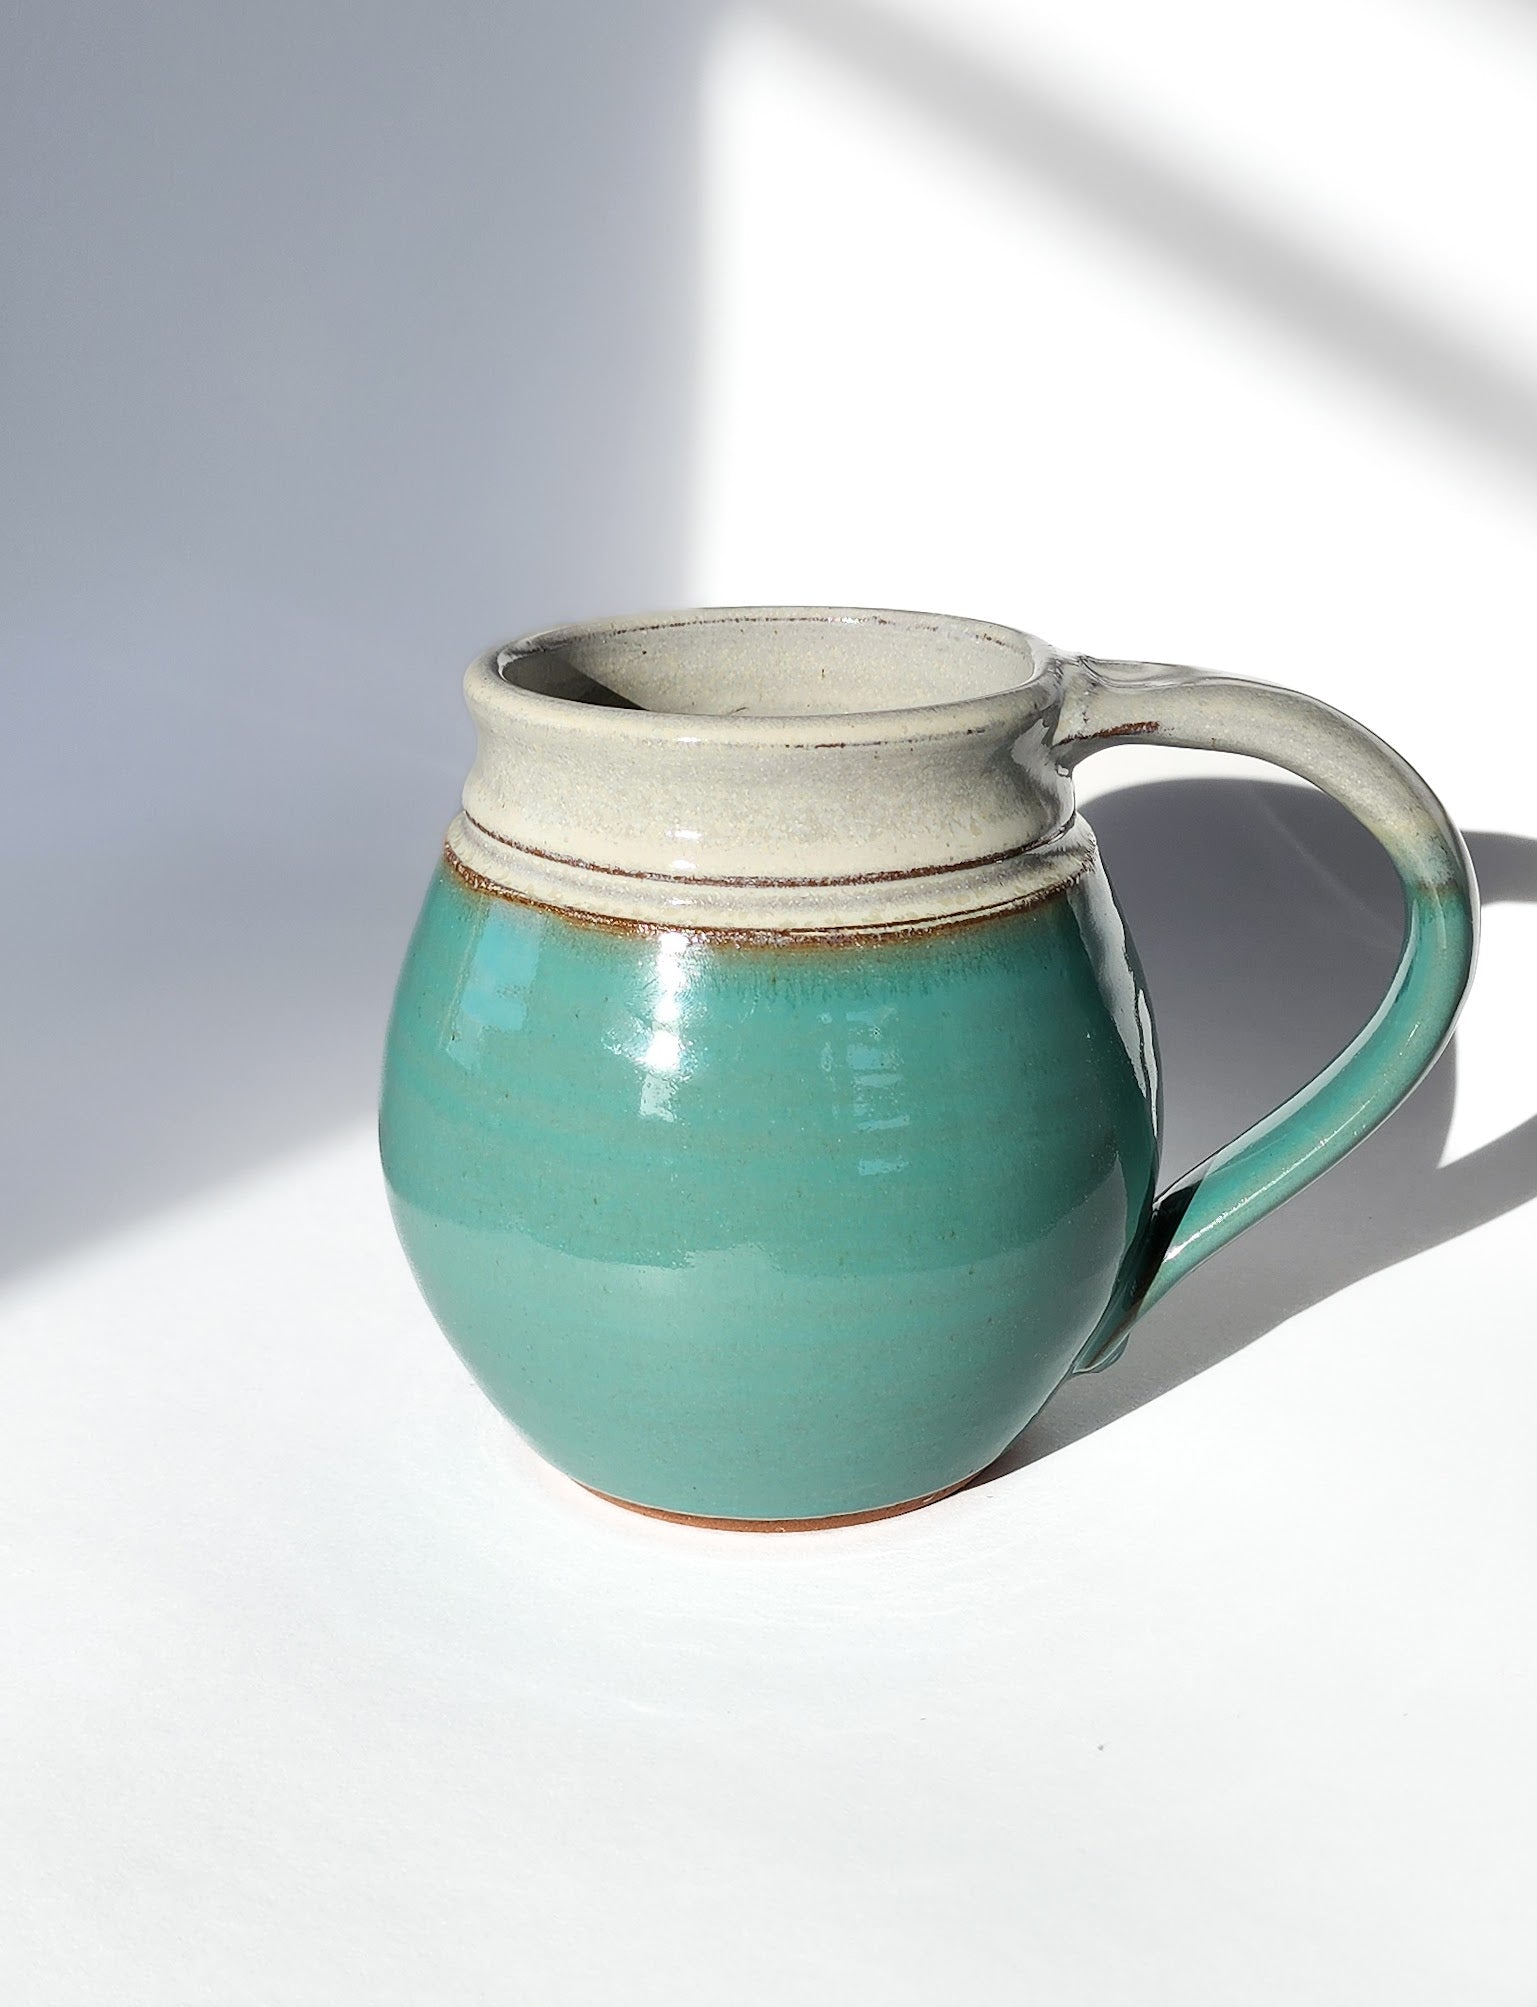 Image: Clinton Pottery's 30 oz Jumbo Mug in Sky Blue – A serene and generously sized addition to your kitchen, this machine washable mug seamlessly blends artistry with functionality. The soothing Sky Blue color adds a touch of tranquility, reminiscent of clear skies and calming waters. Perfect for enjoying ample servings of your favorite coffee or tea with a breath of peaceful charm.